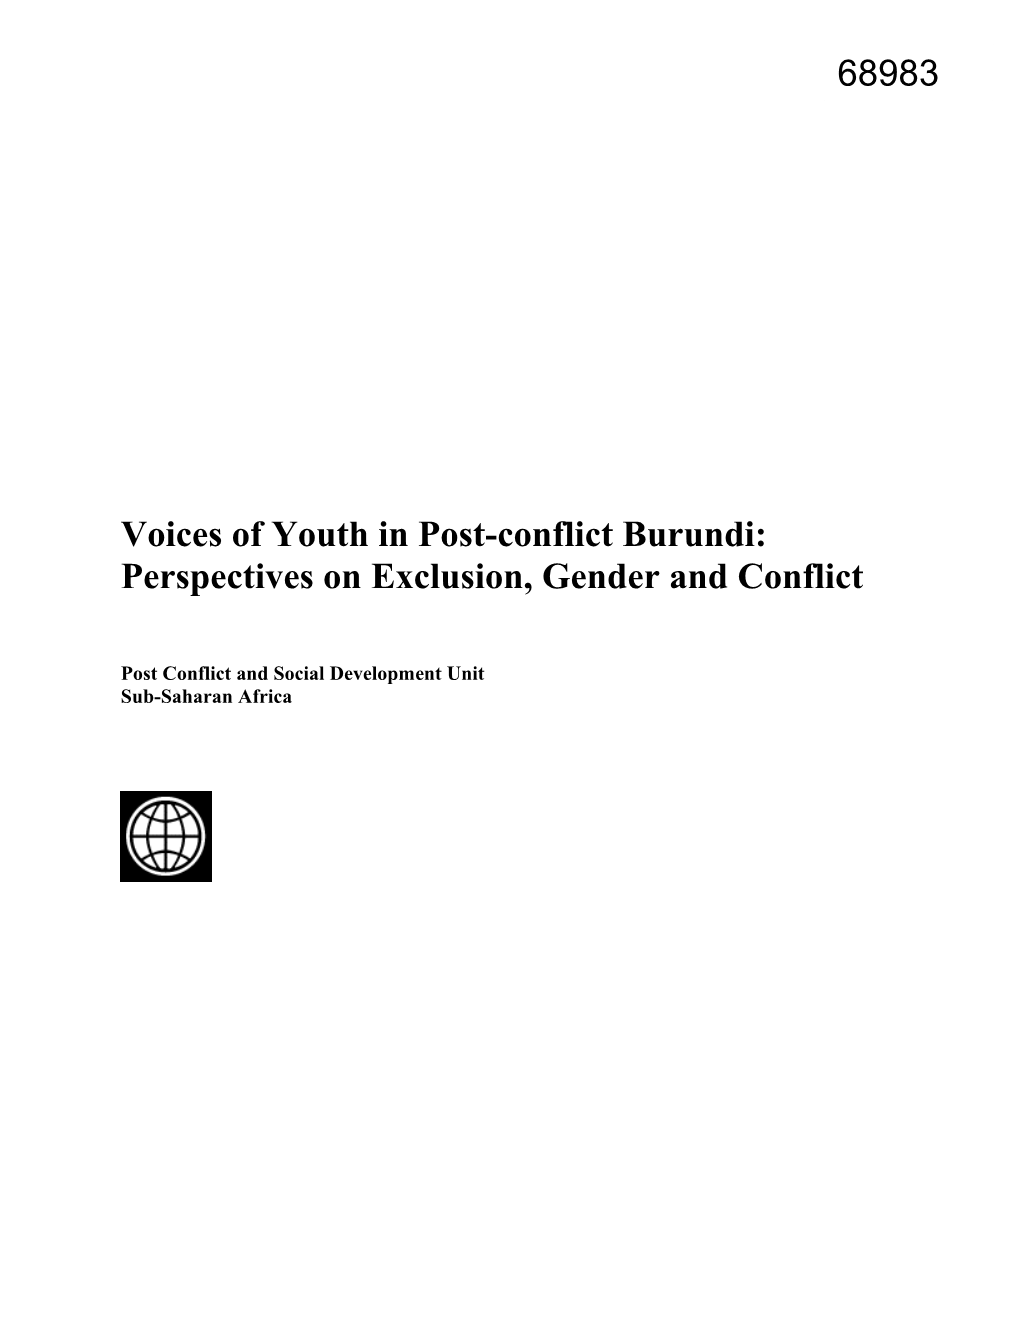 Voices of Youth in Post-Conflict Burundi: Perspectives on Exclusion, Gender and Conflict